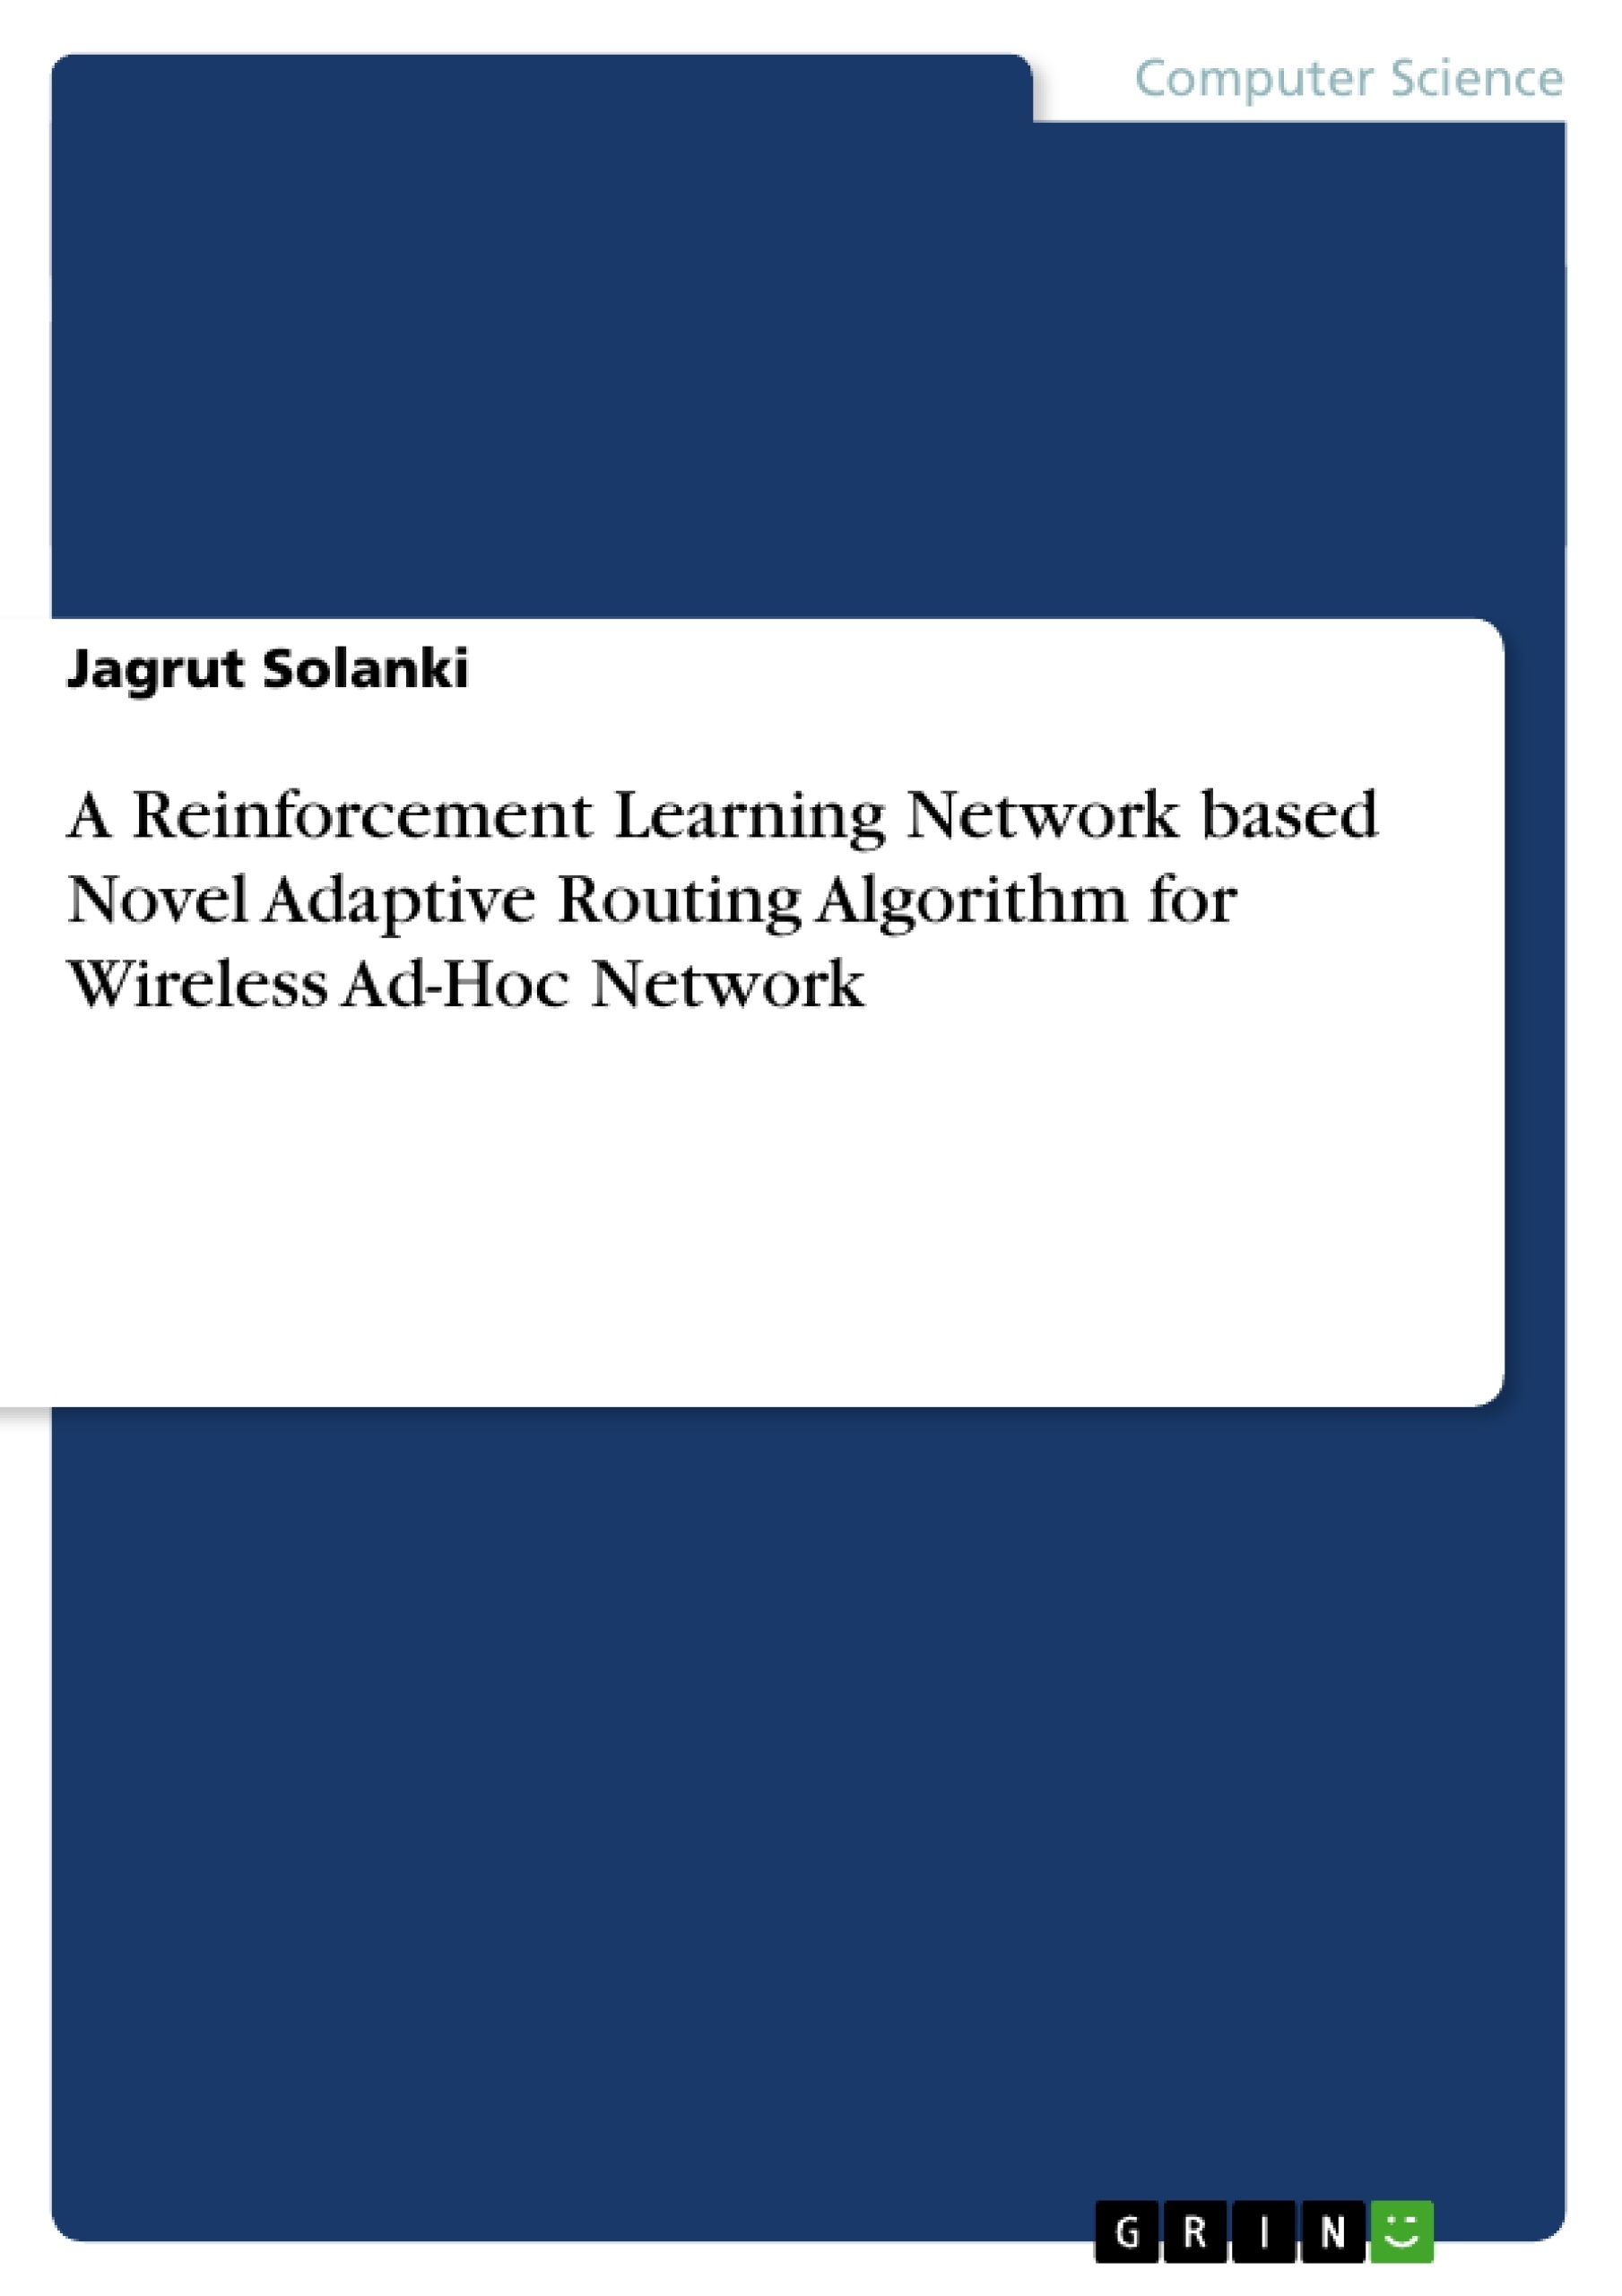 Título: A Reinforcement Learning Network based Novel Adaptive Routing Algorithm for Wireless Ad-Hoc Network